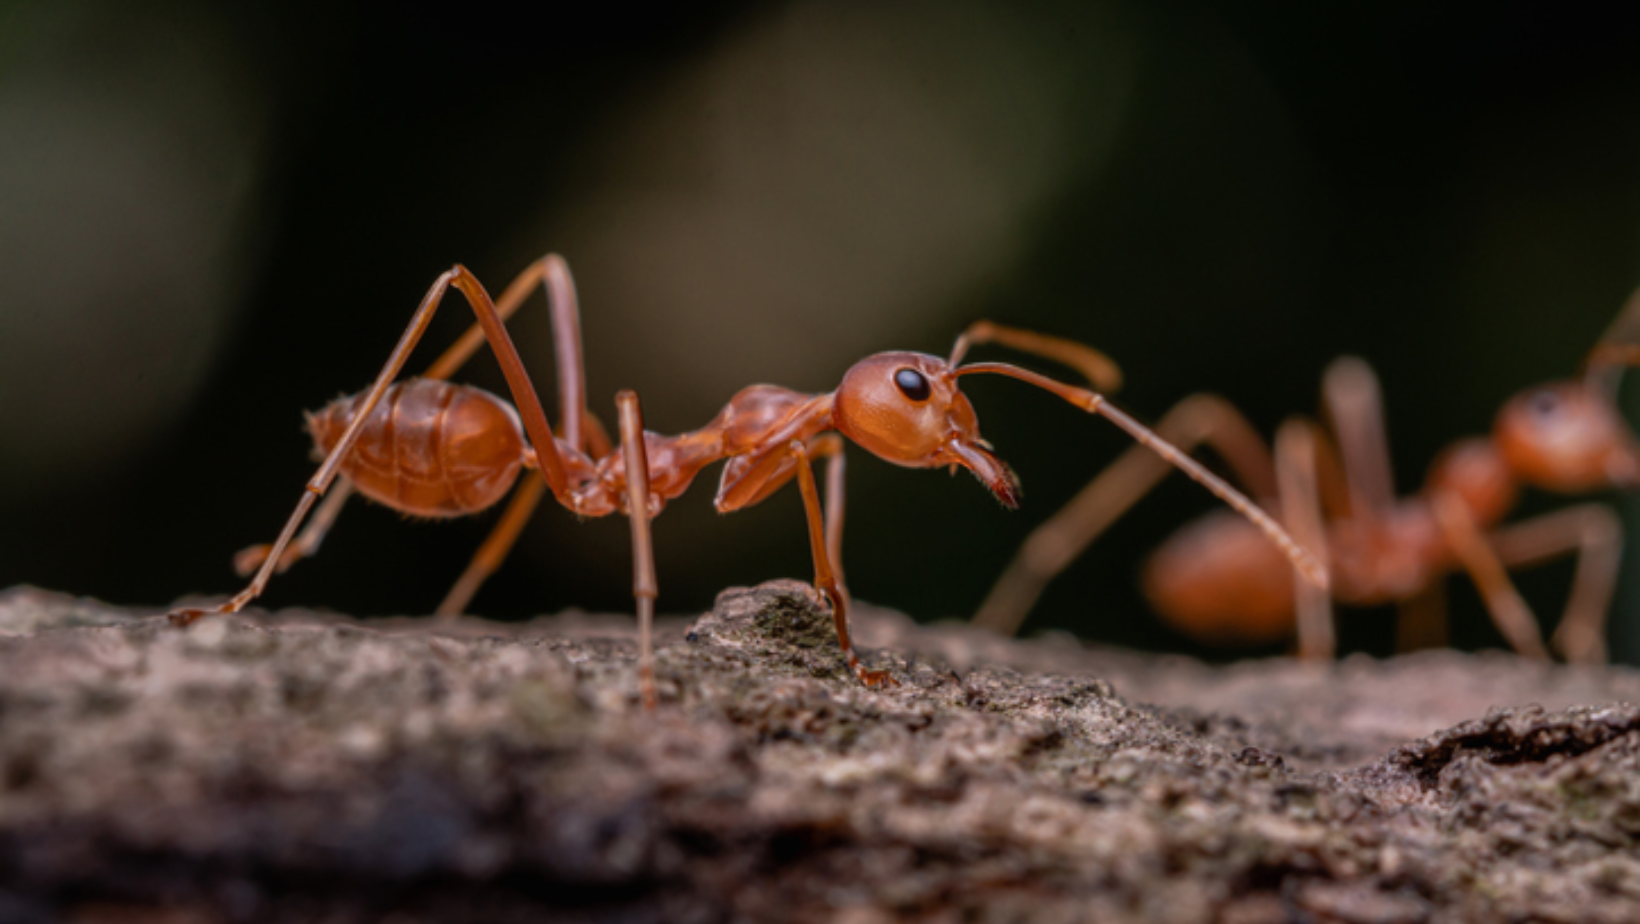 How To Prevent Ants From Coming Inside Your Home?